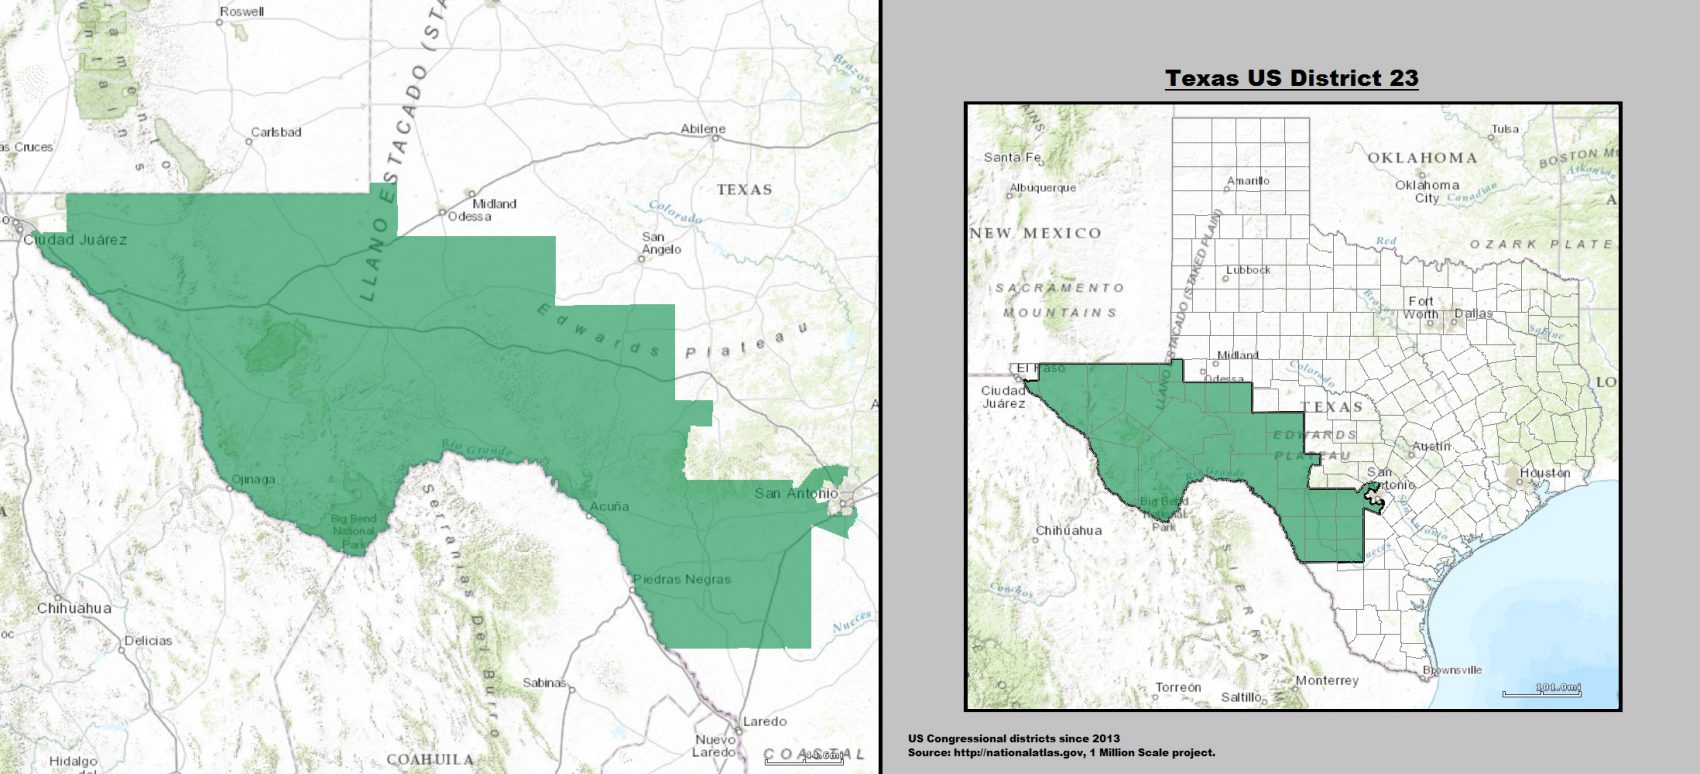 Texas US Congressional District 23 since 2013